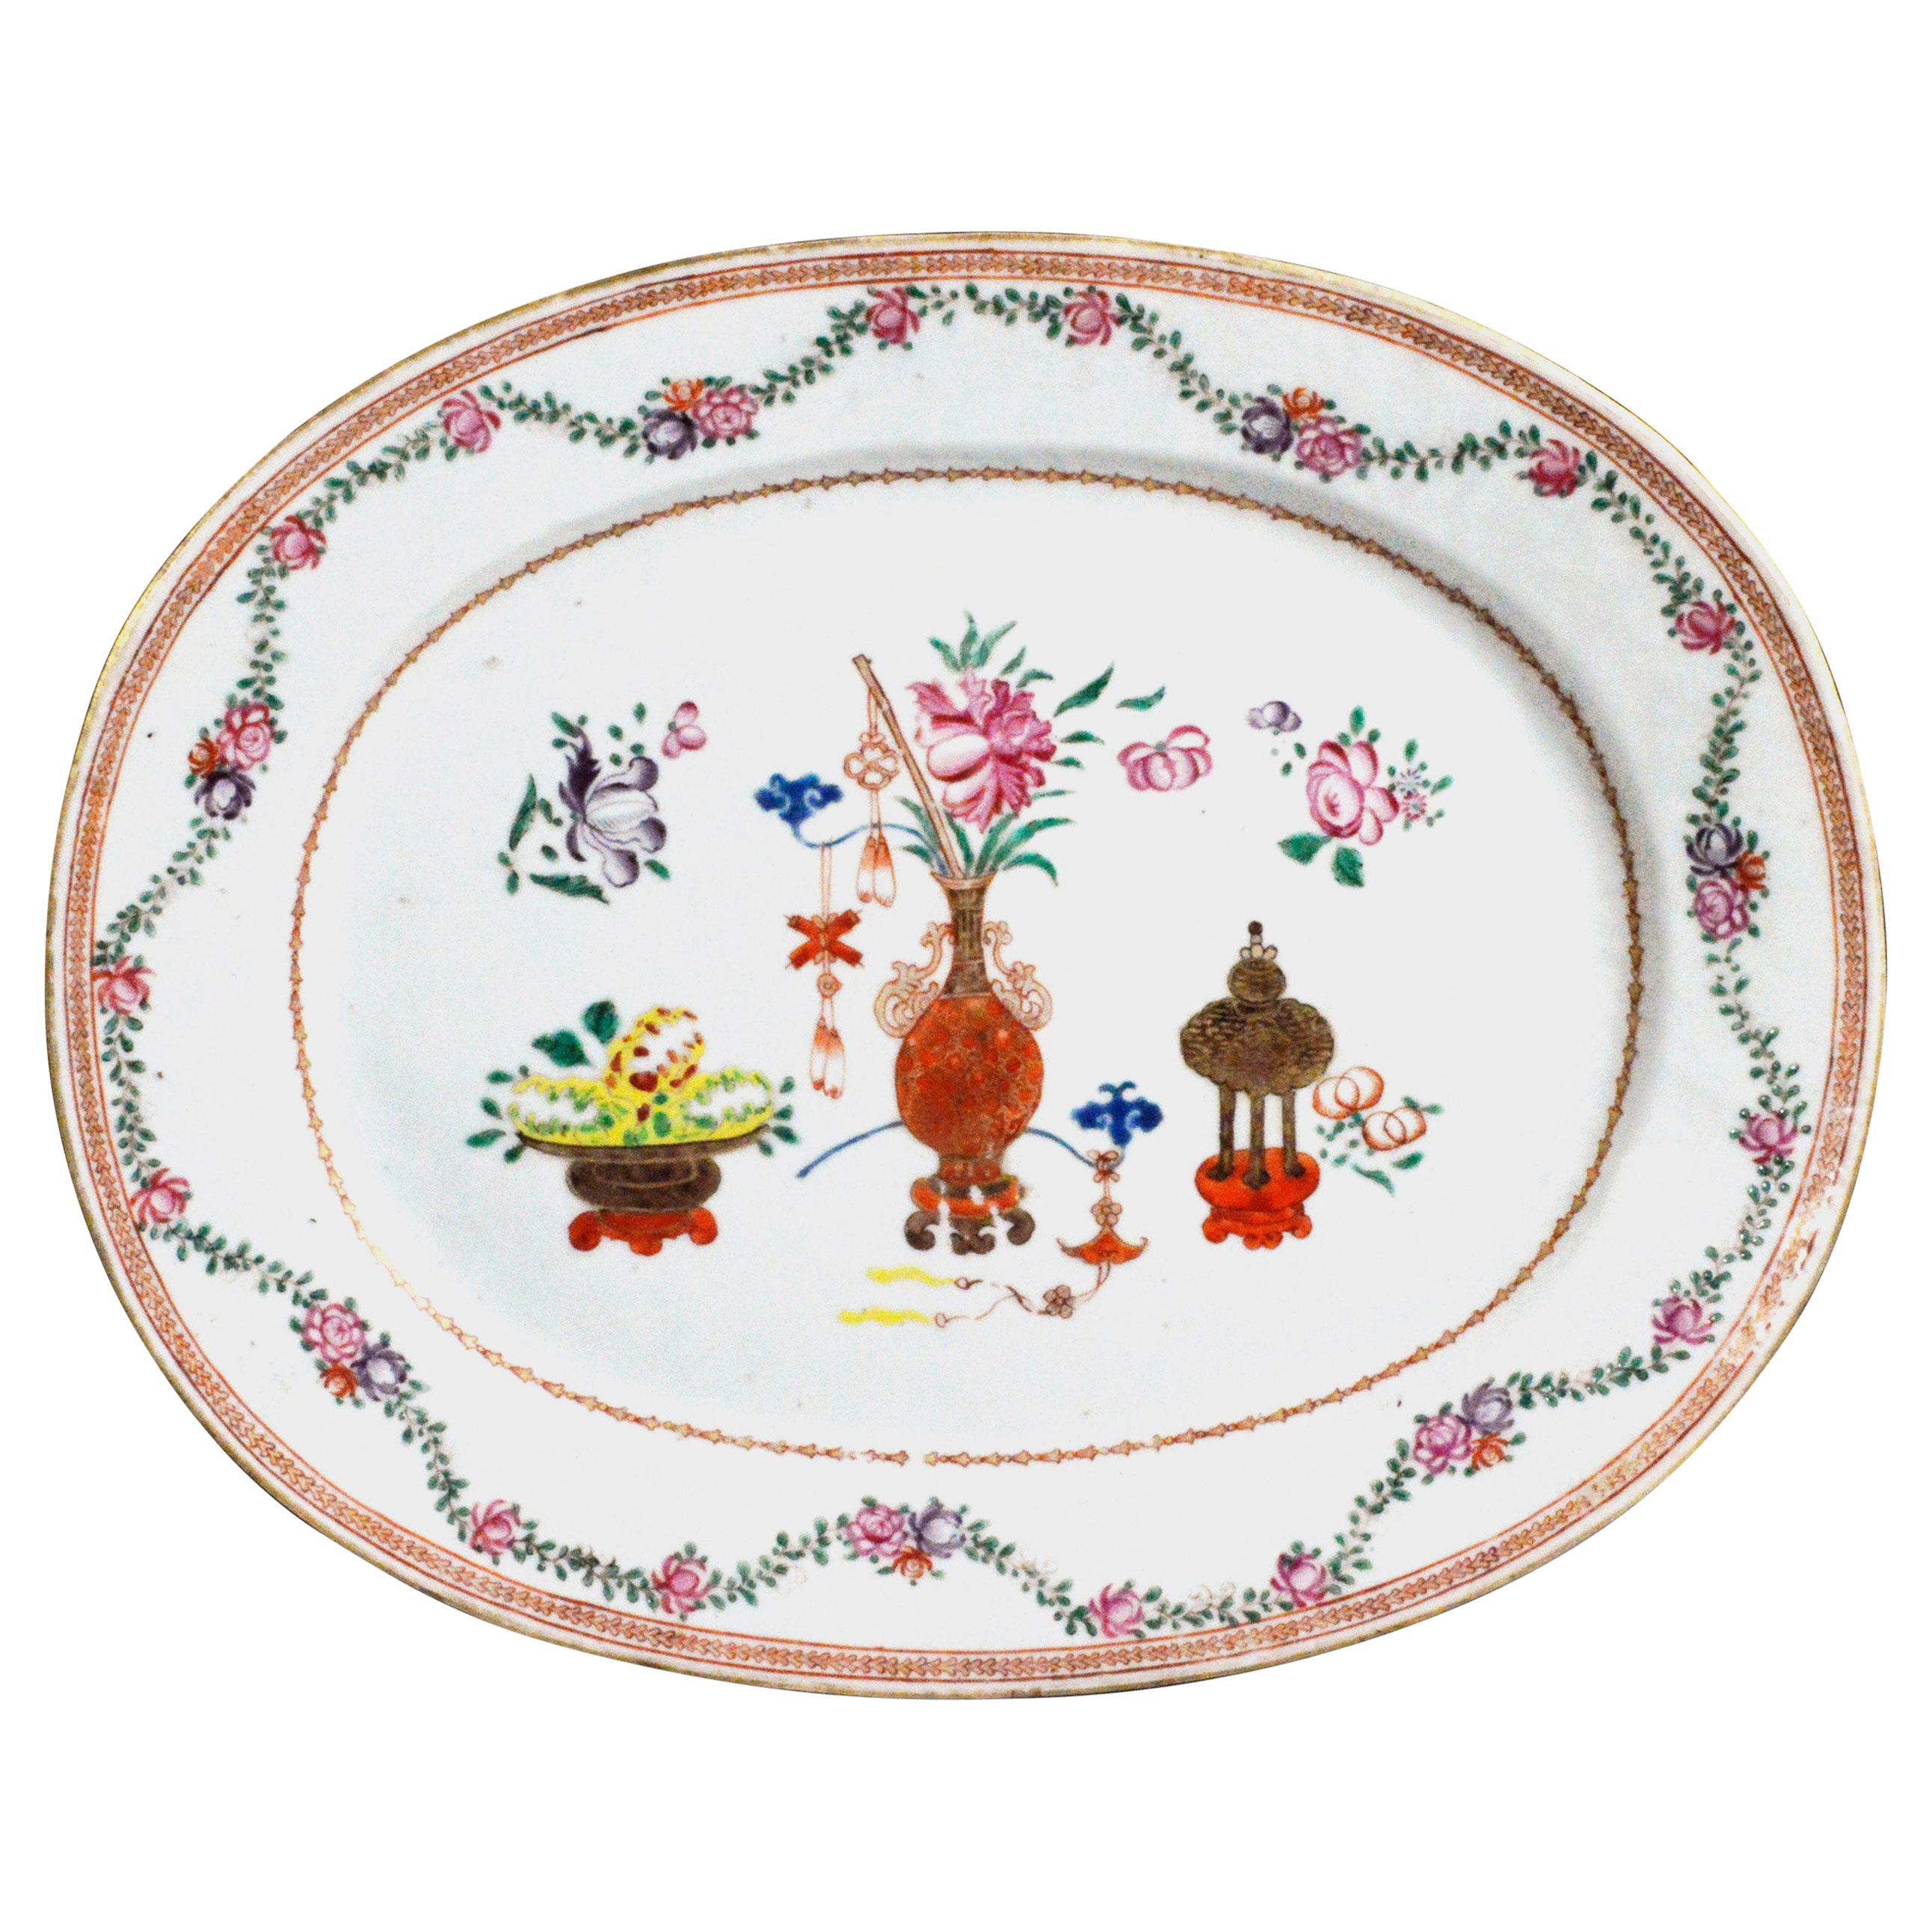 Chinese Export Oval Famille Rose Porcelain Dish